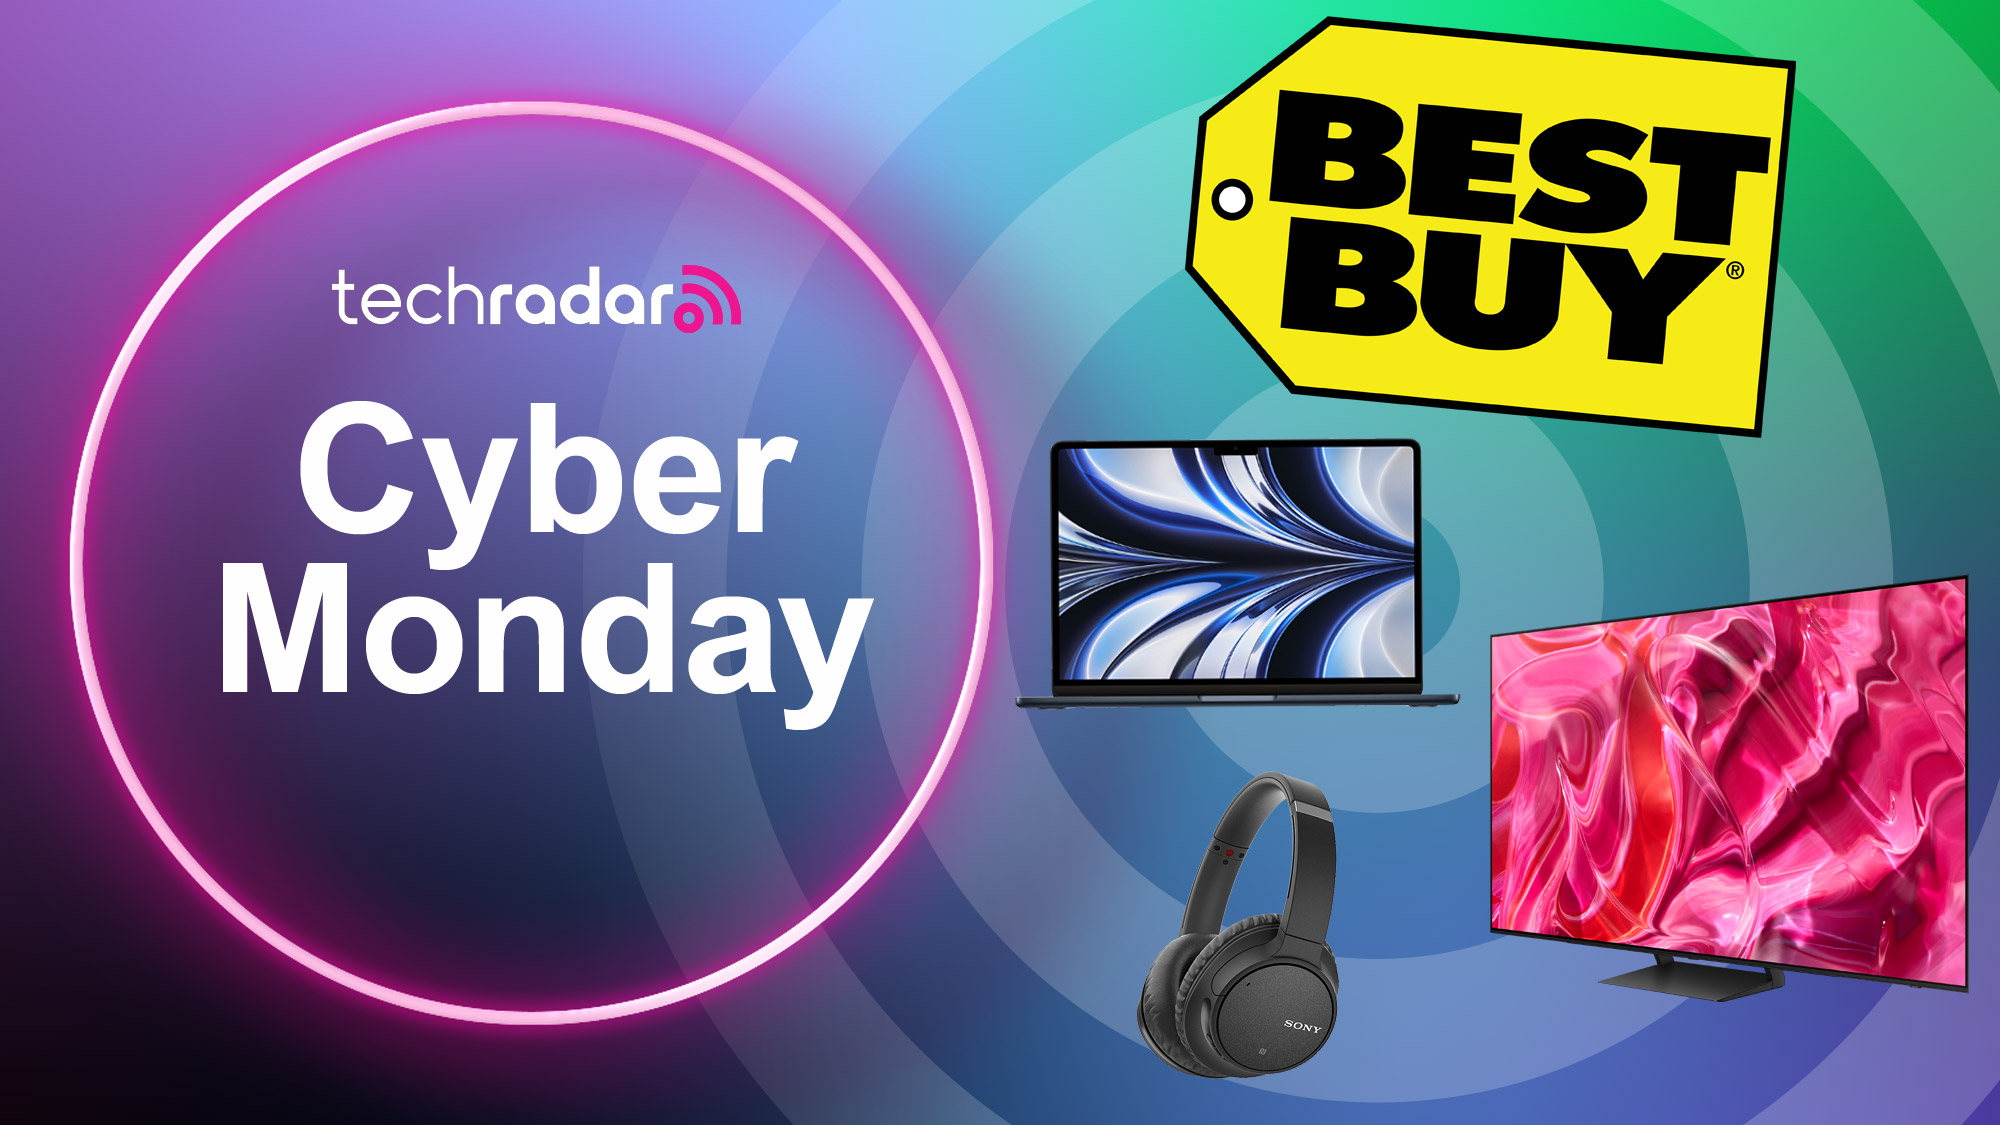 48 Cyber Monday deals under $50 that will help you stick to your